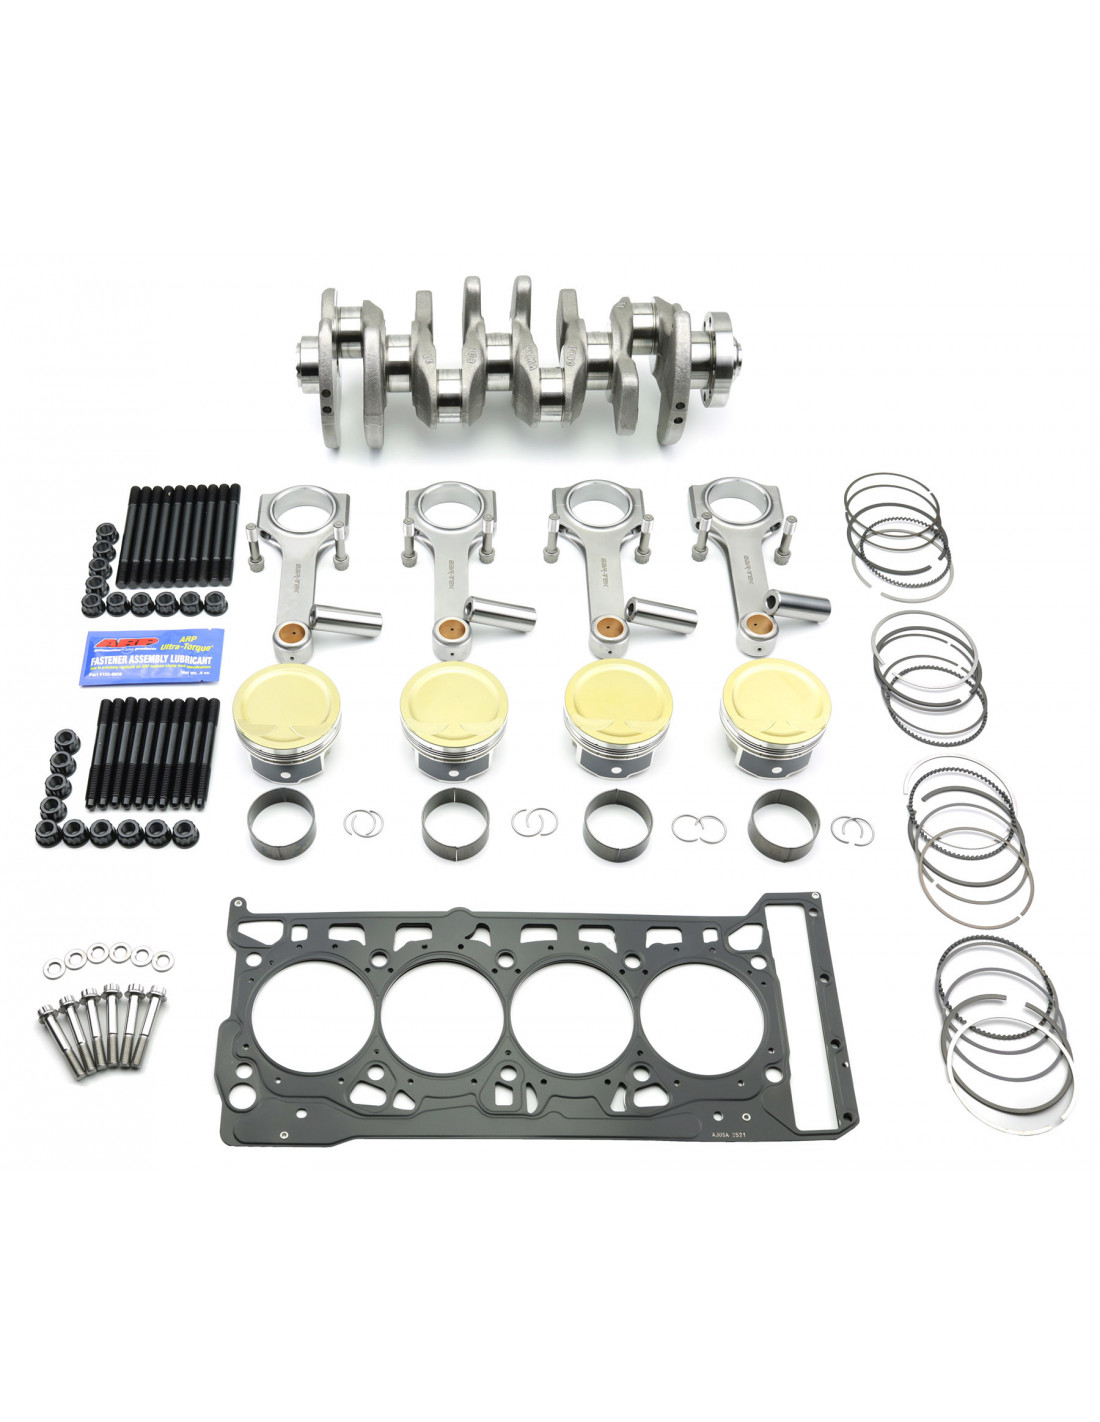 Kit Ultimate STROKER HIGH BOOST connecting rods forged pistons ARP hardware  ACL bearing 1000hp for 1.8